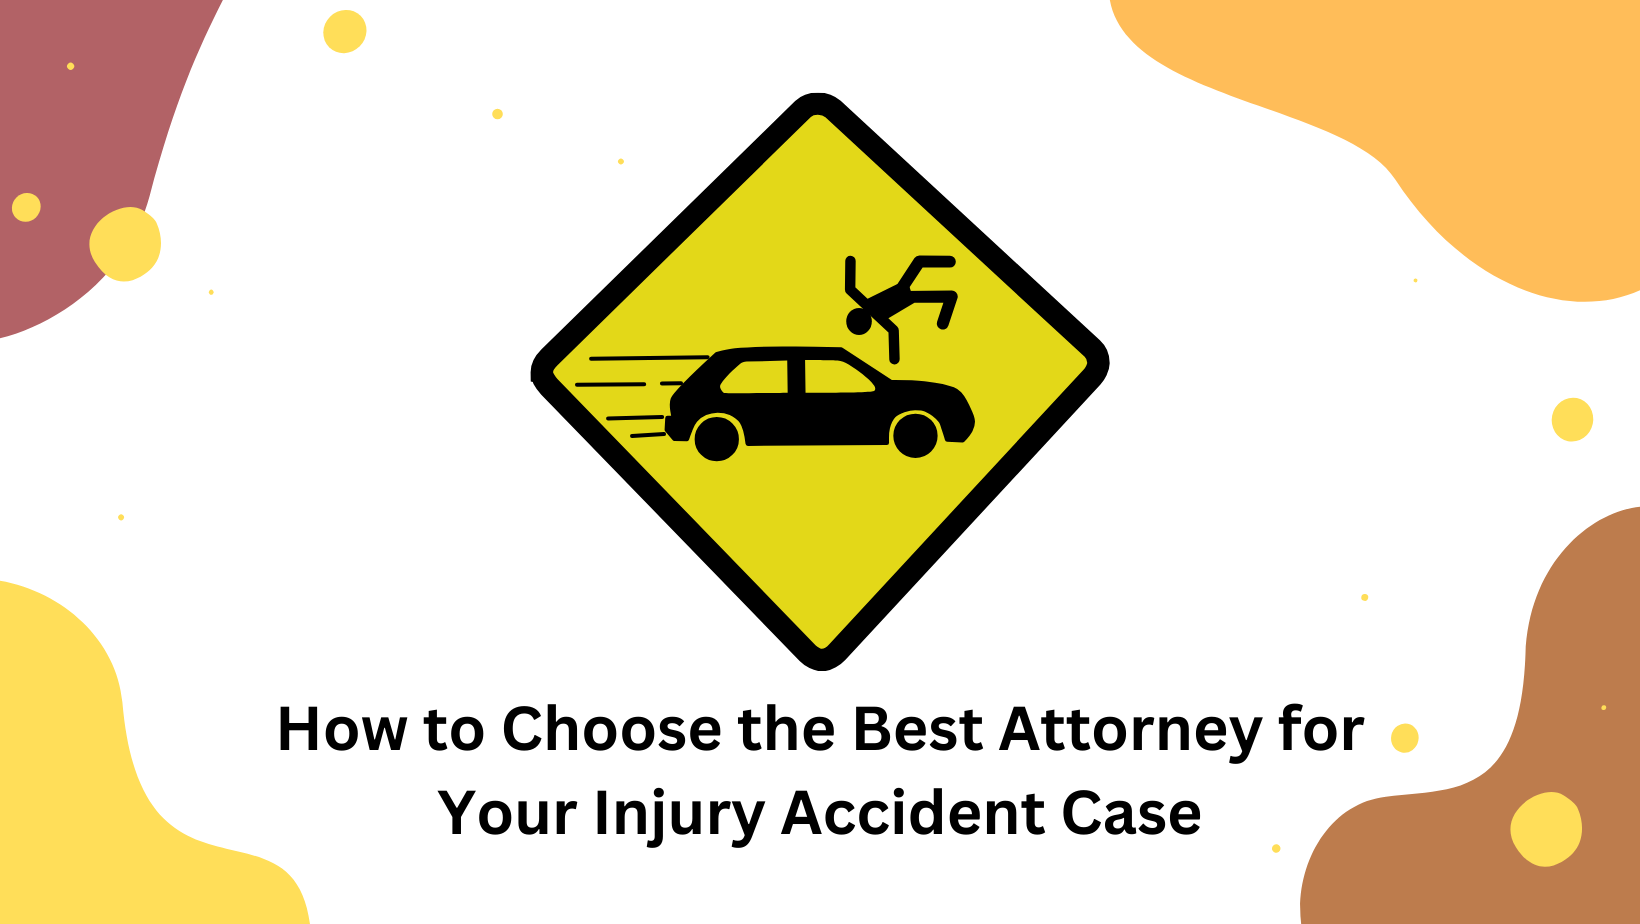 Best Attorney for Your Injury Accident Case